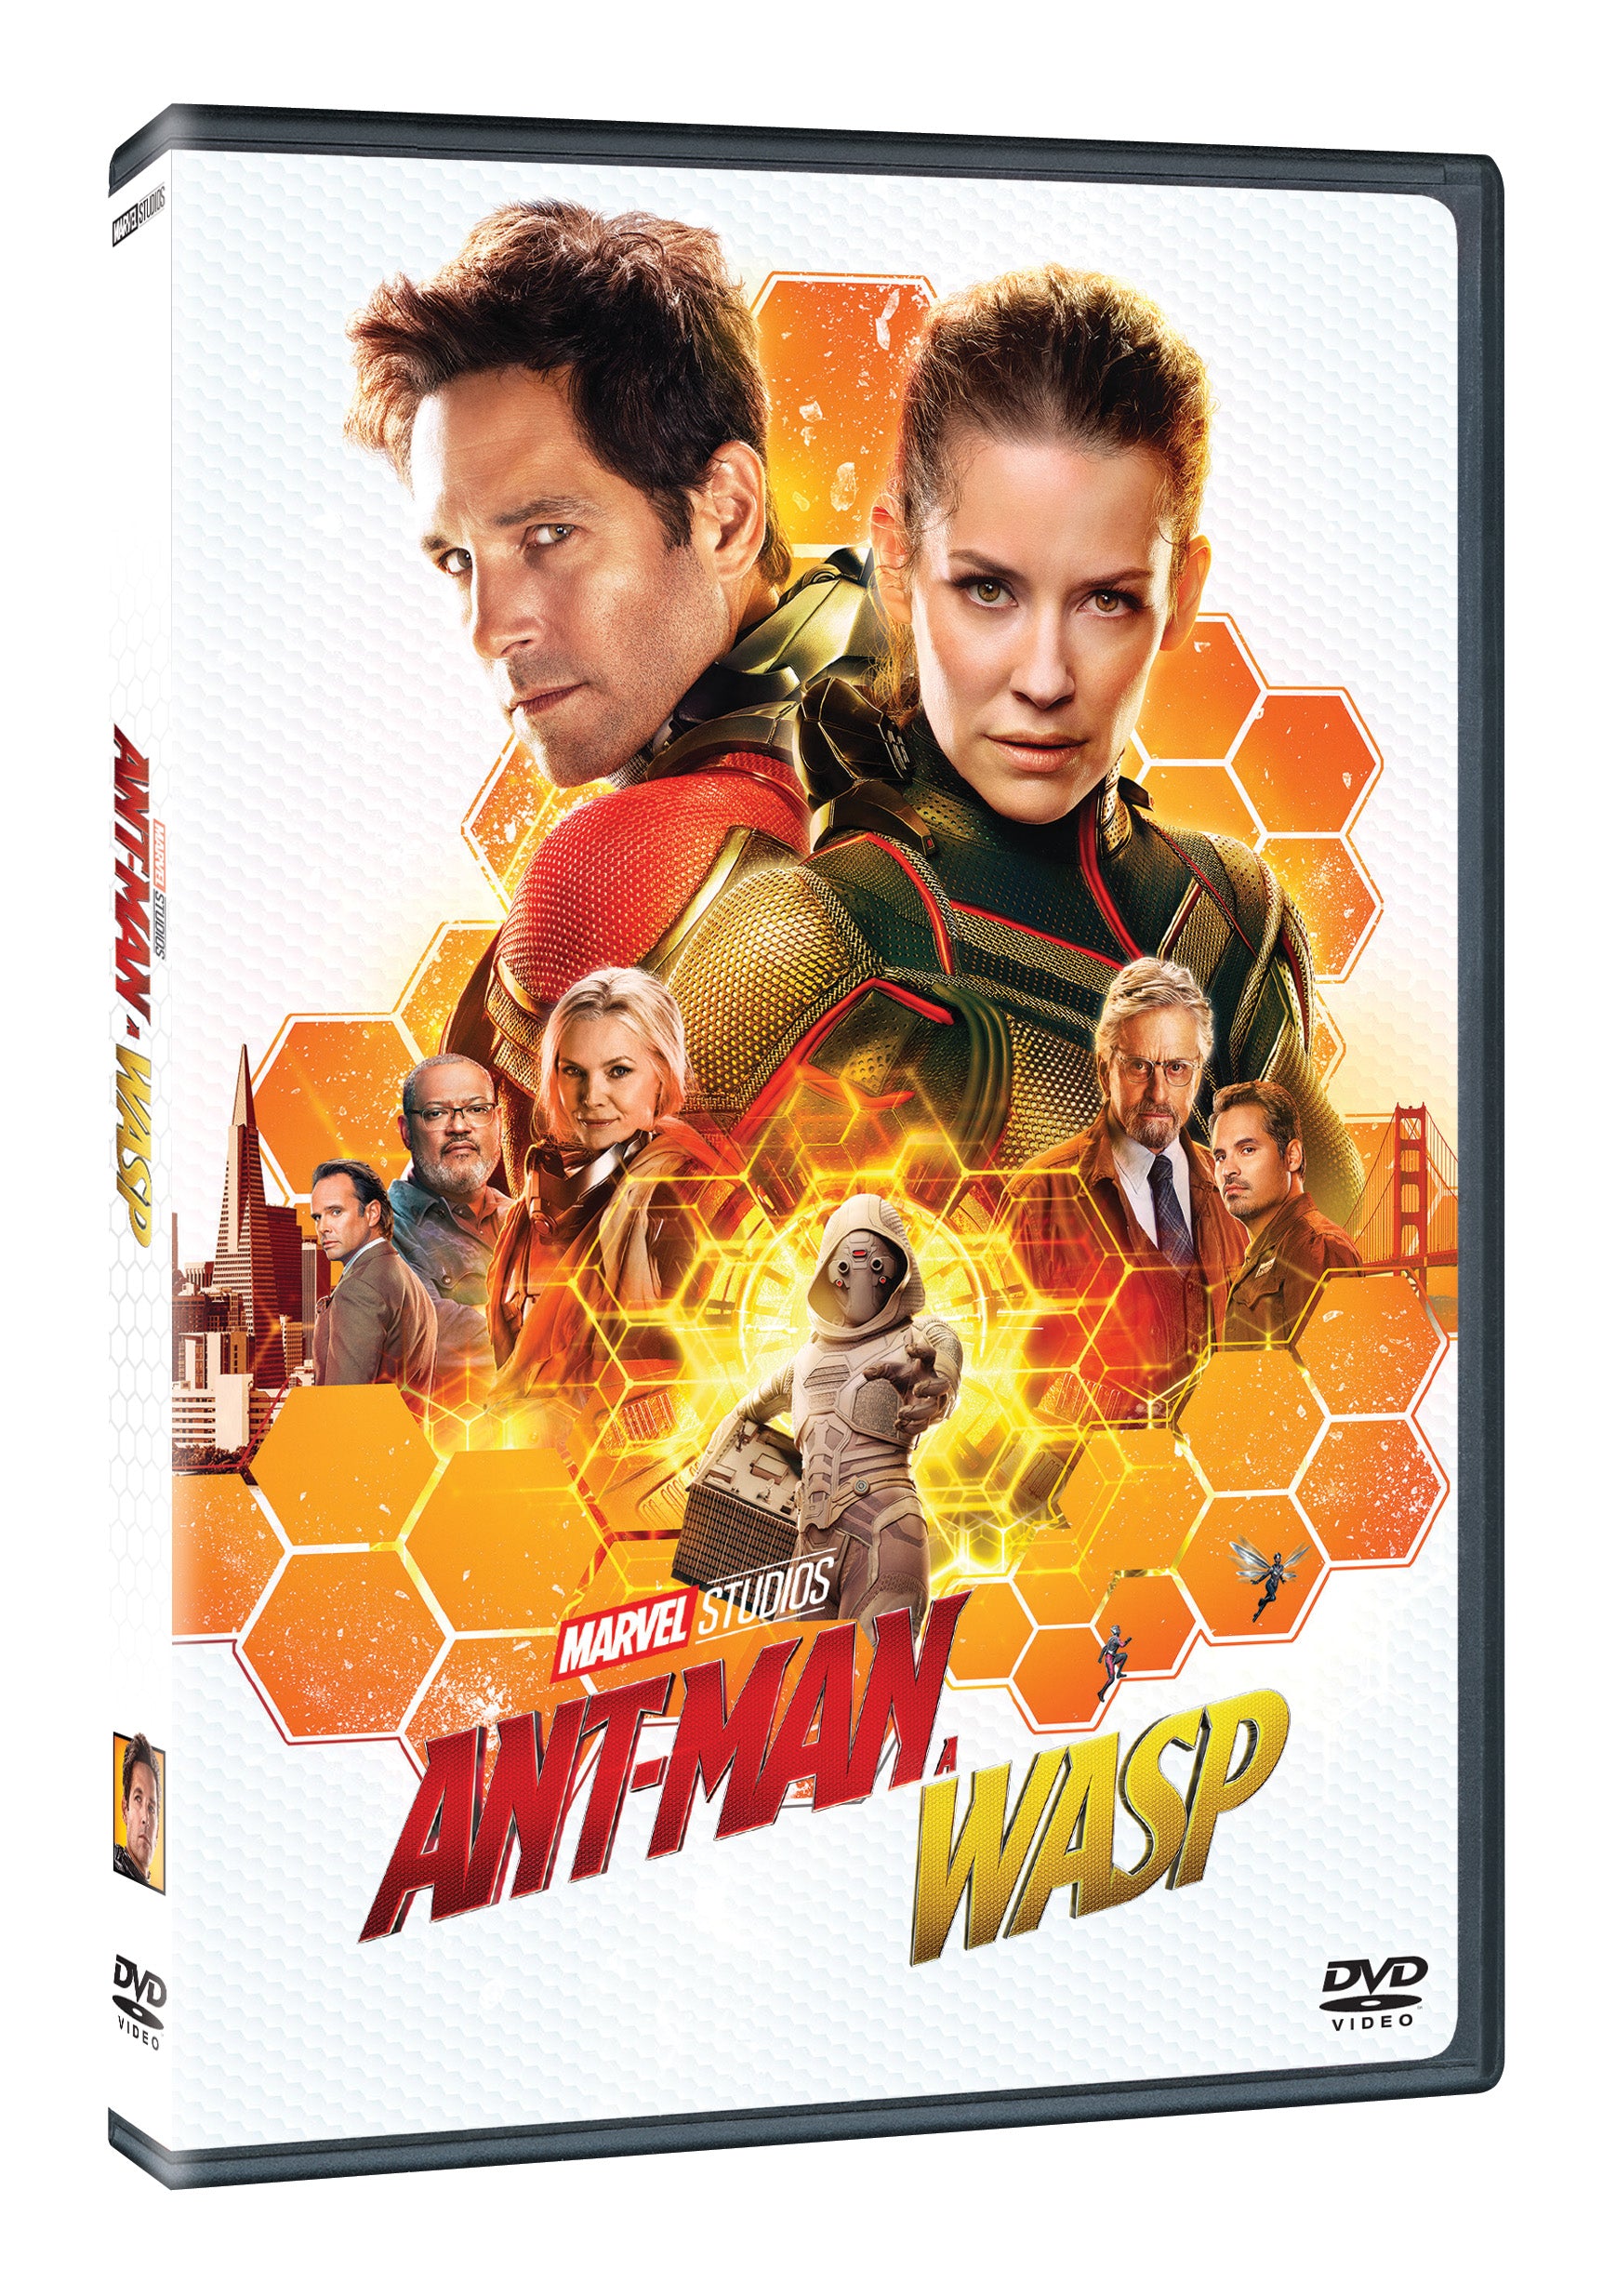 Ant-Man a Wasp DVD / Ant-Man and the Wasp